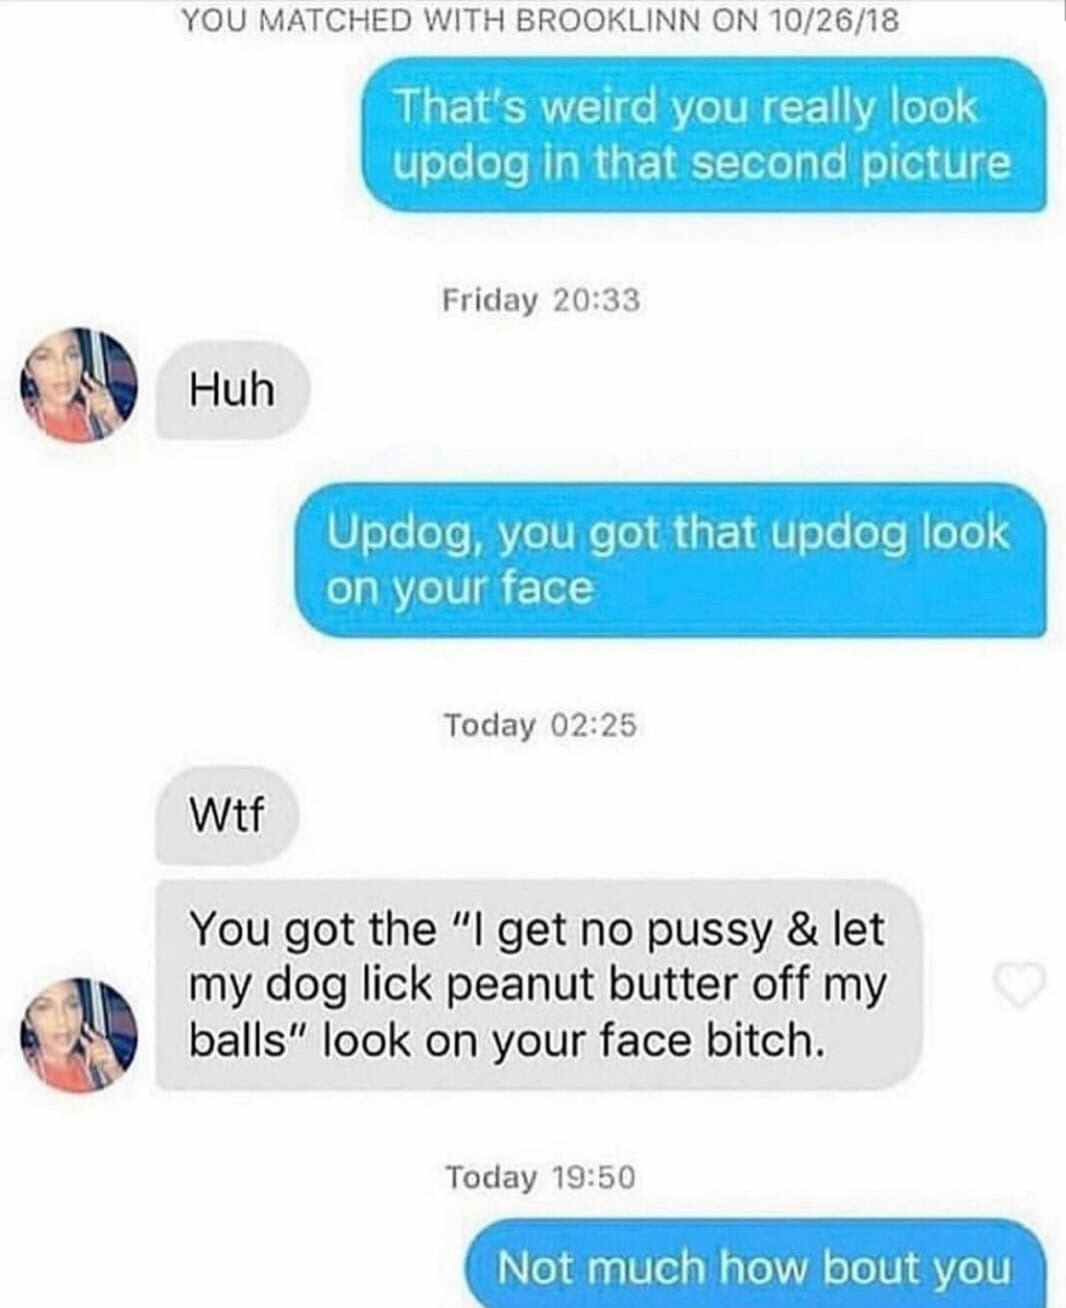 web page - You Matched With Brooklinn On 102618 That's weird you really look updog in that second picture Friday Huh Updog, you got that updog look on your face Today Wtf You got the "I get no pussy & let my dog lick peanut butter off my balls" look on yo